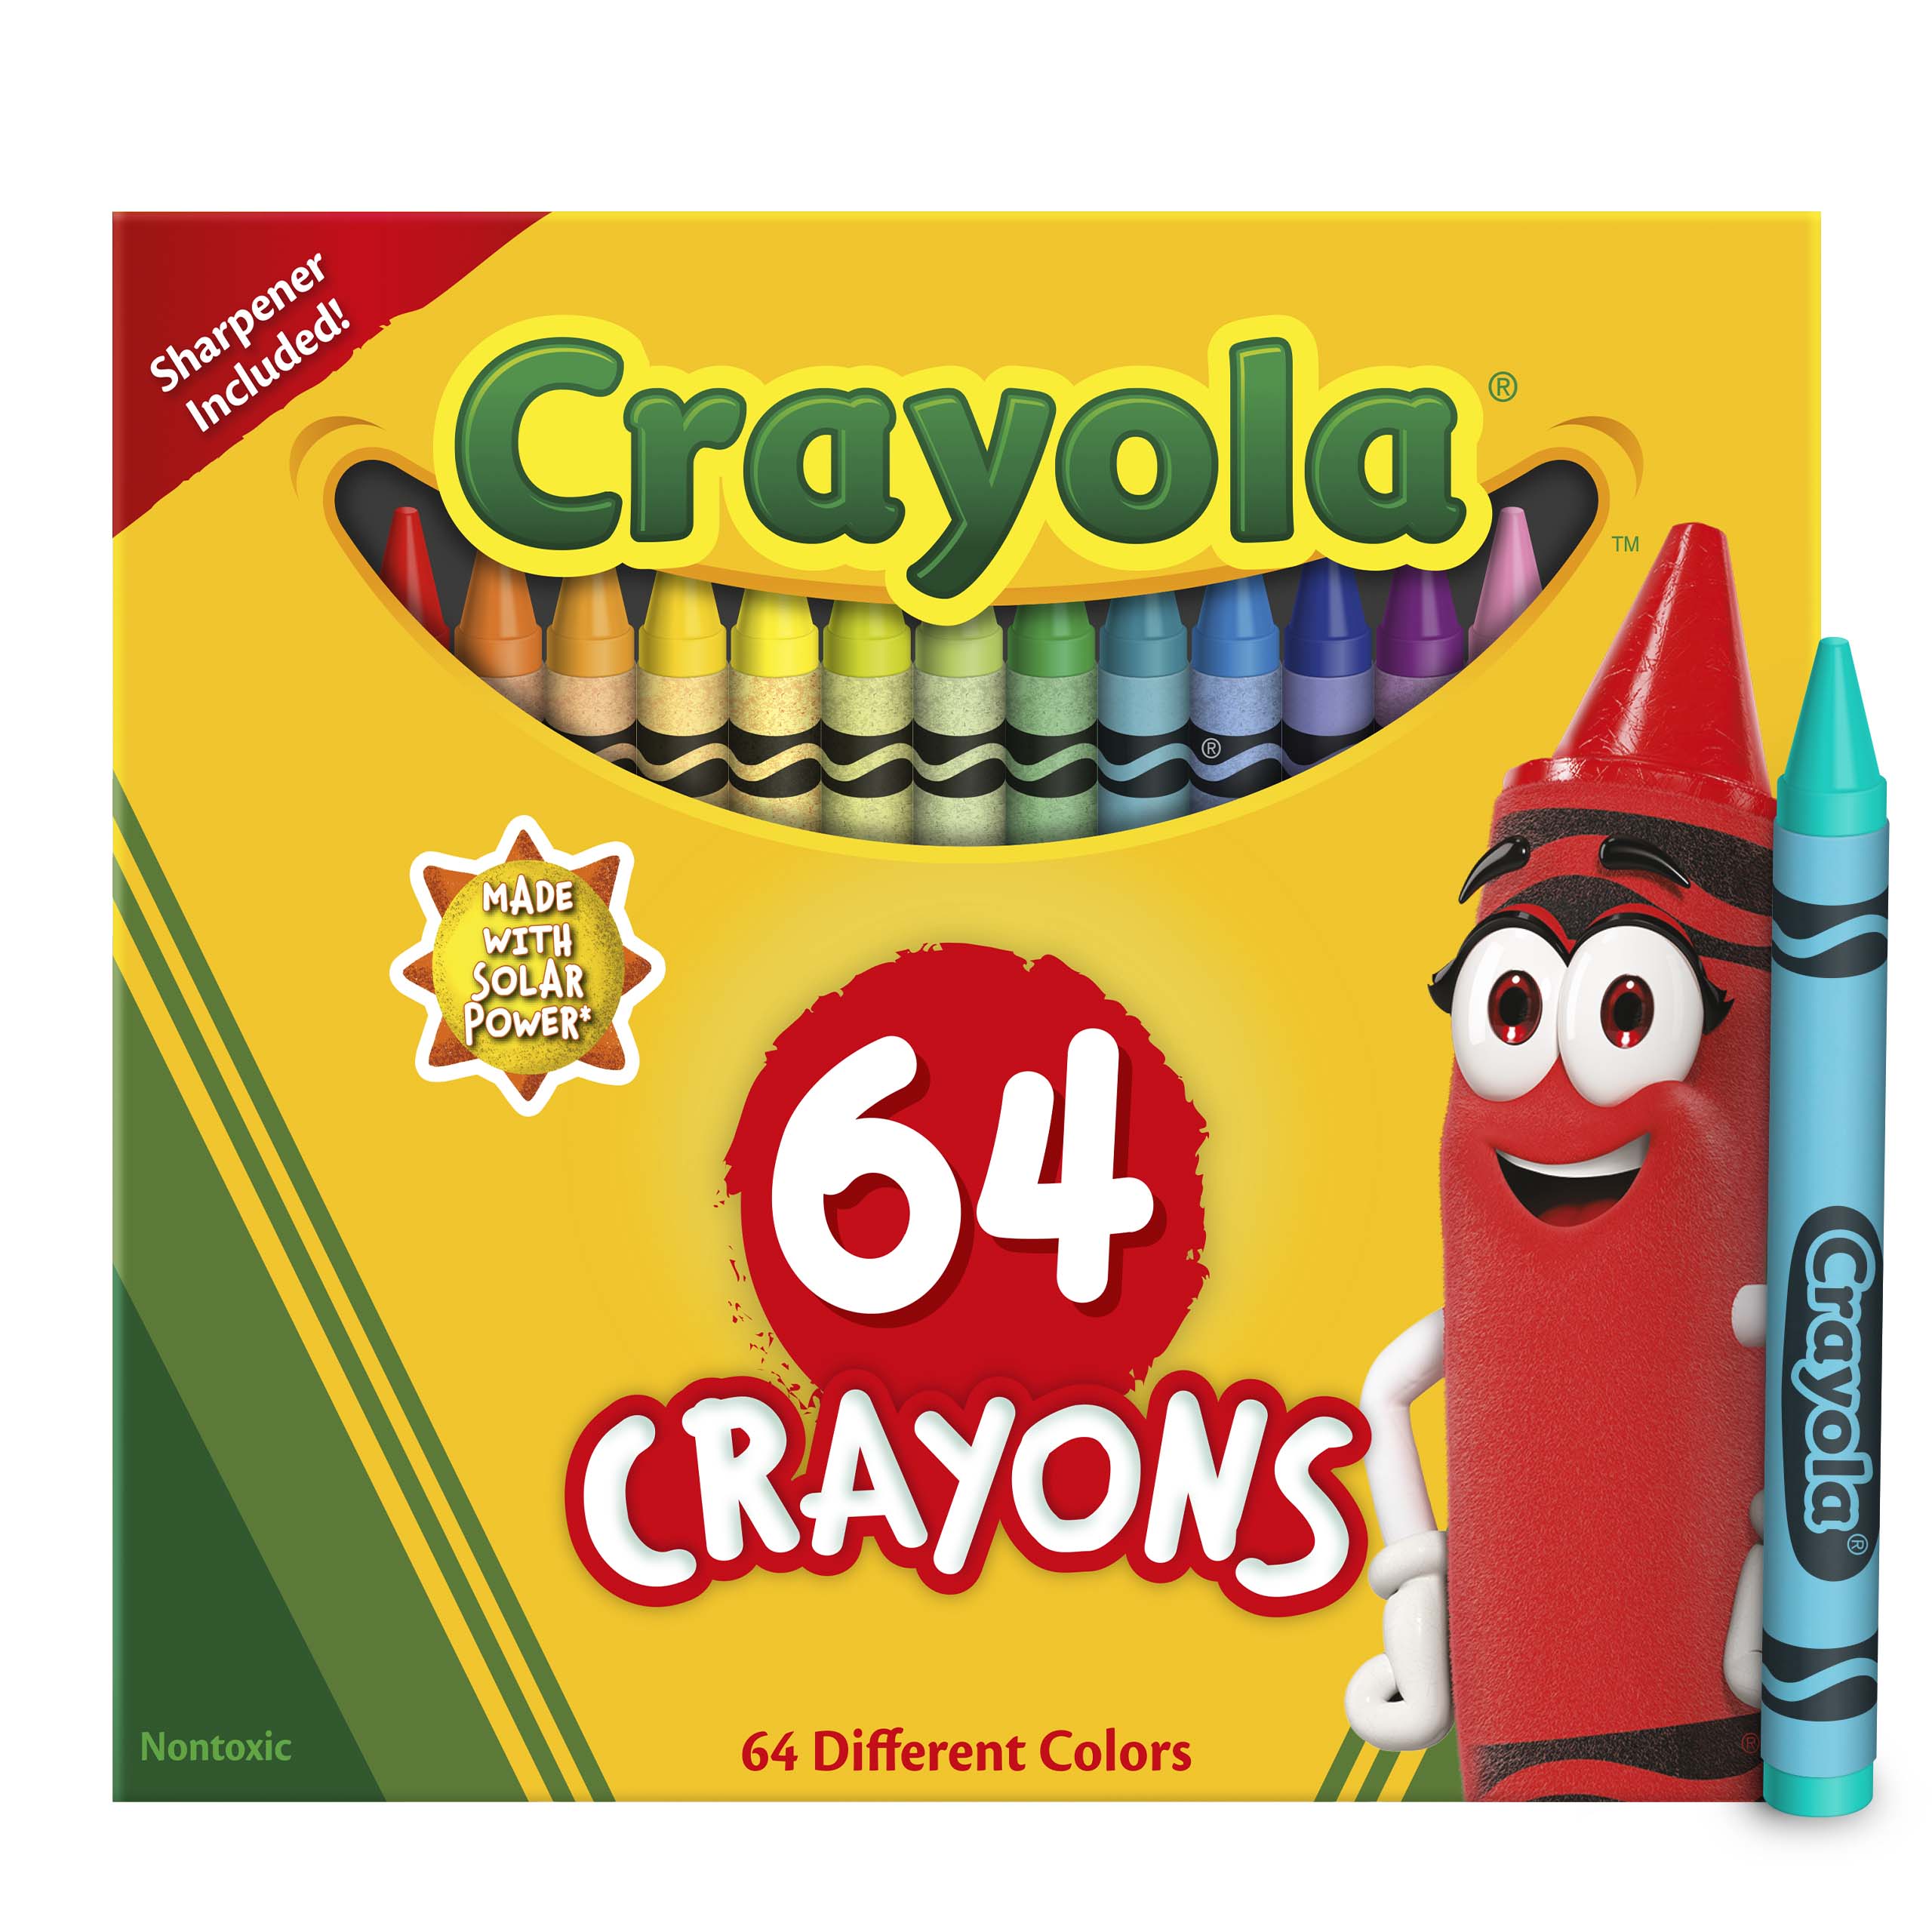 Crayola Crayons, 64 Ct, Back to School Supplies for Kids, Teacher Supplies, Gift - image 1 of 10